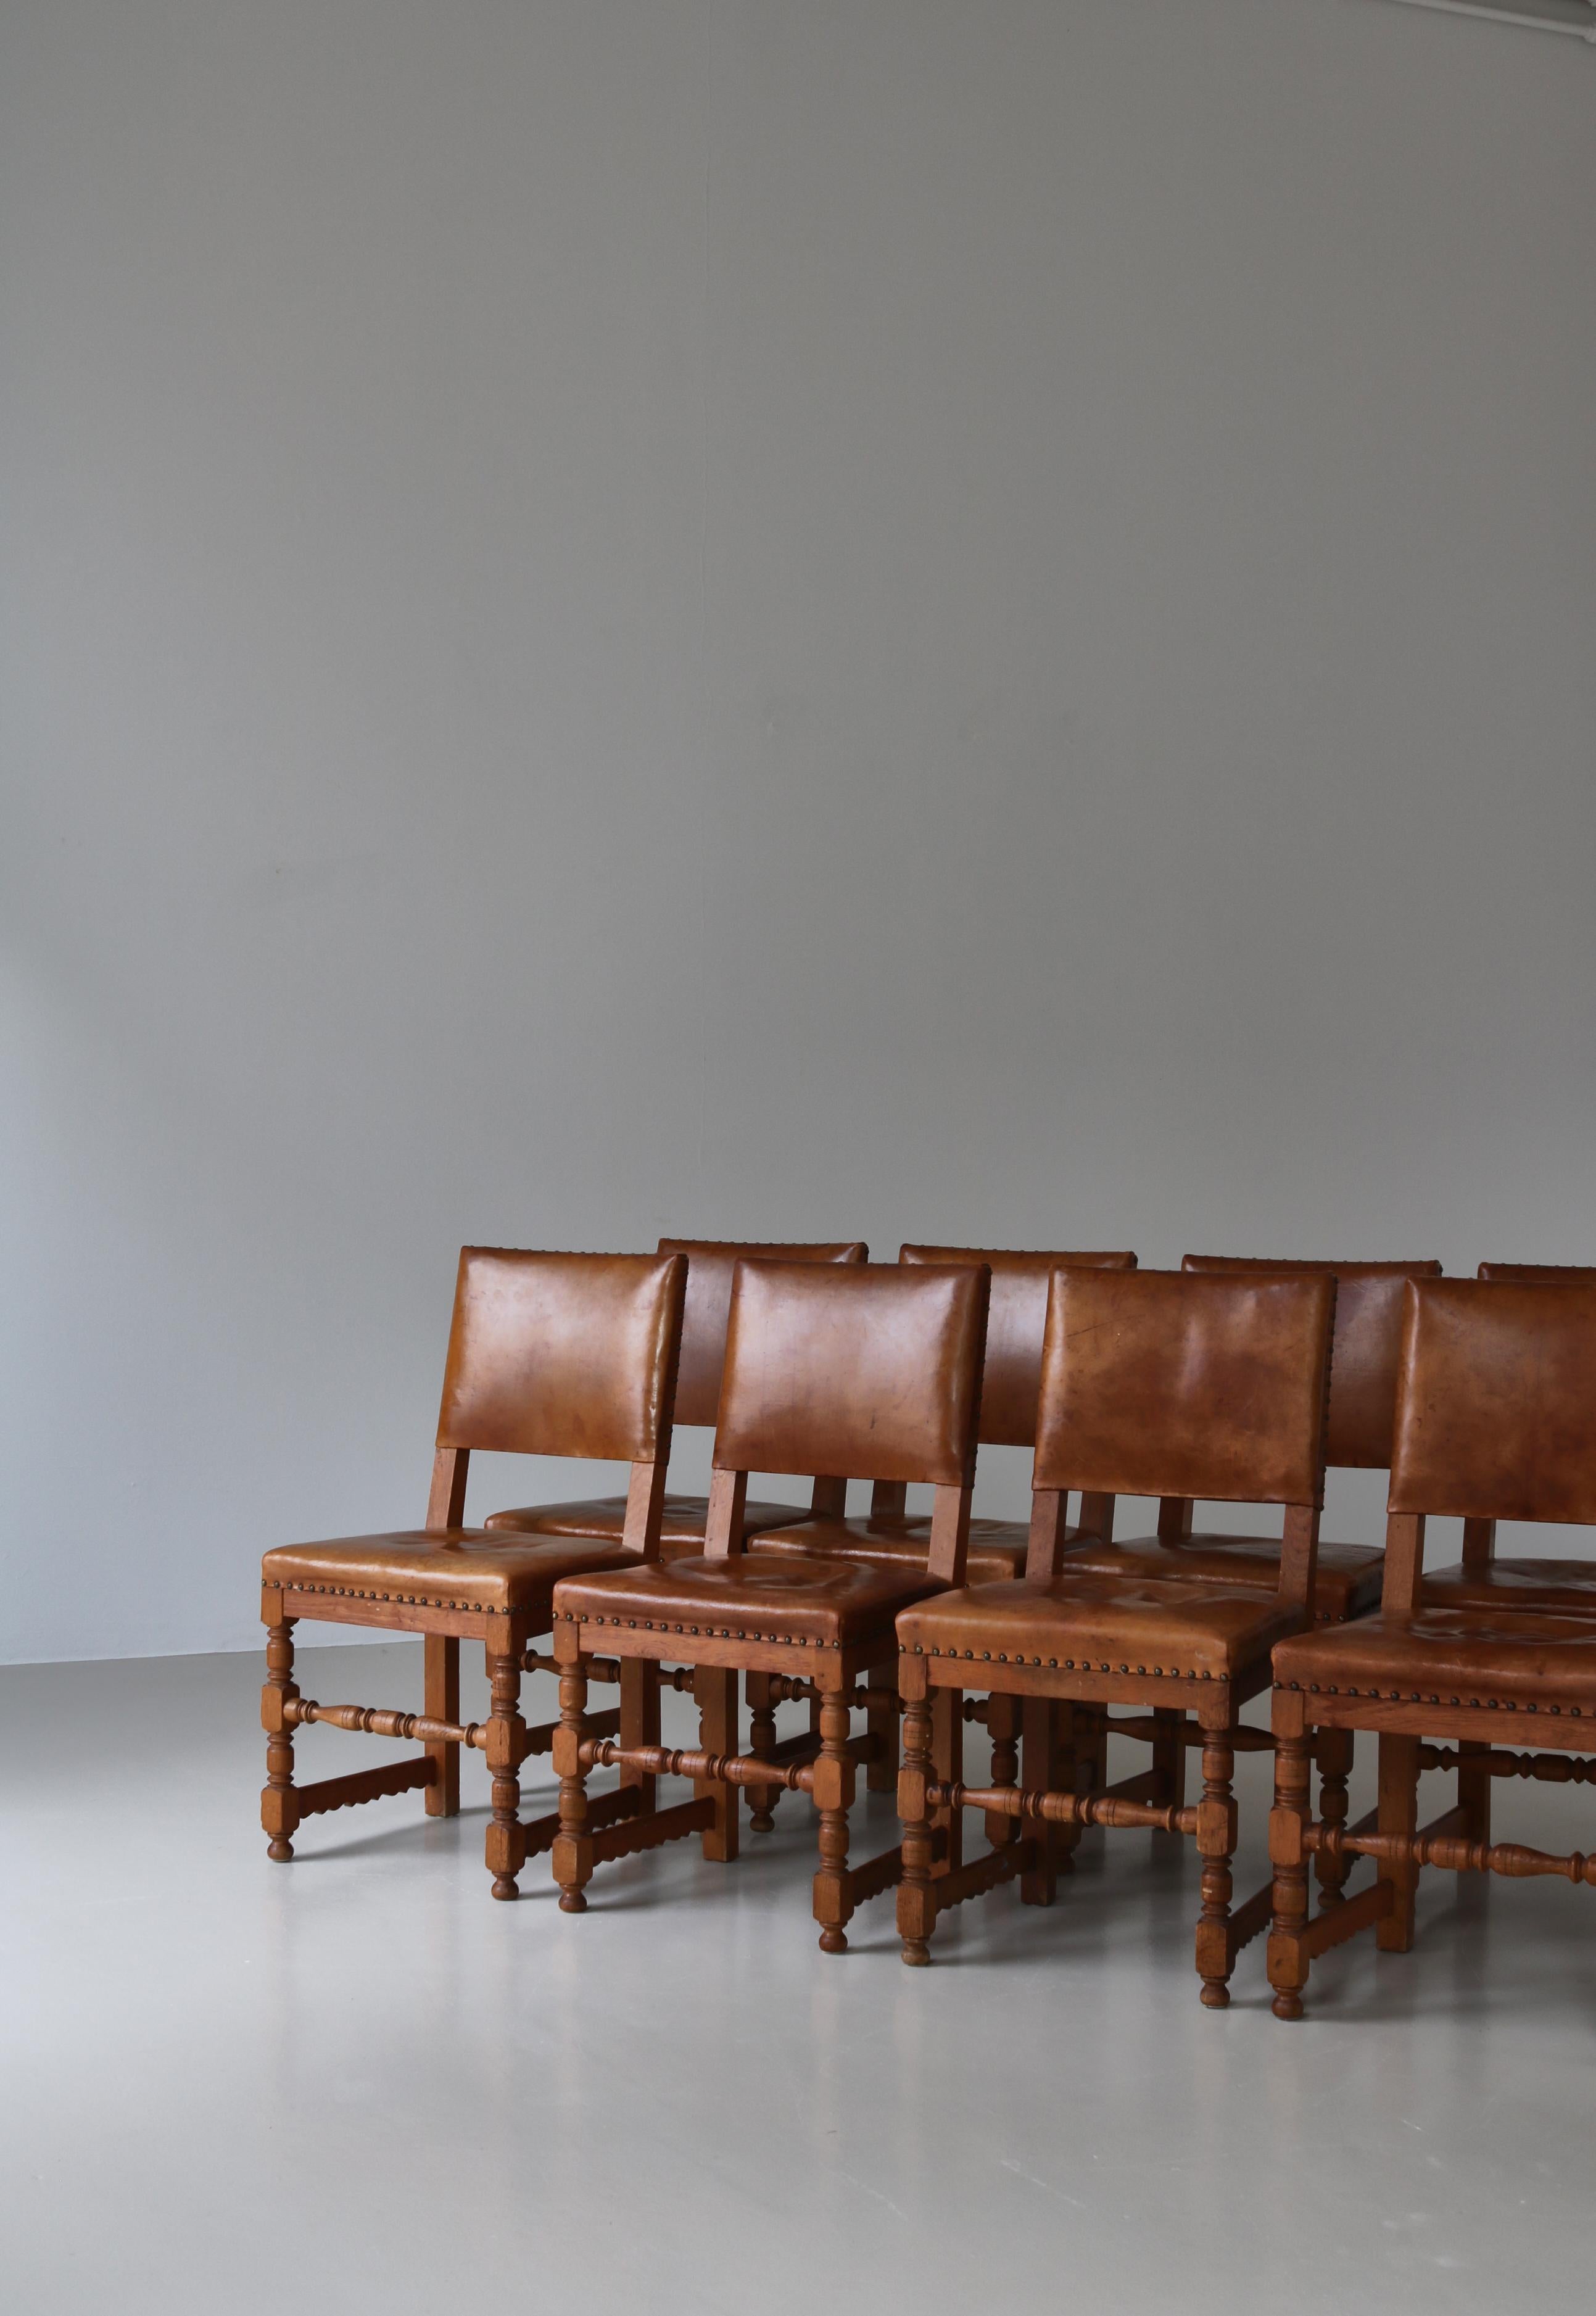 Stunning set of dining chairs in solid oak and natural leather made by Danish Master Cabinetmaker Lars Møller, Copenhagen in the 1930s. The chairs are modern but with a playful expression and many fine details like the turned and carved spokes which